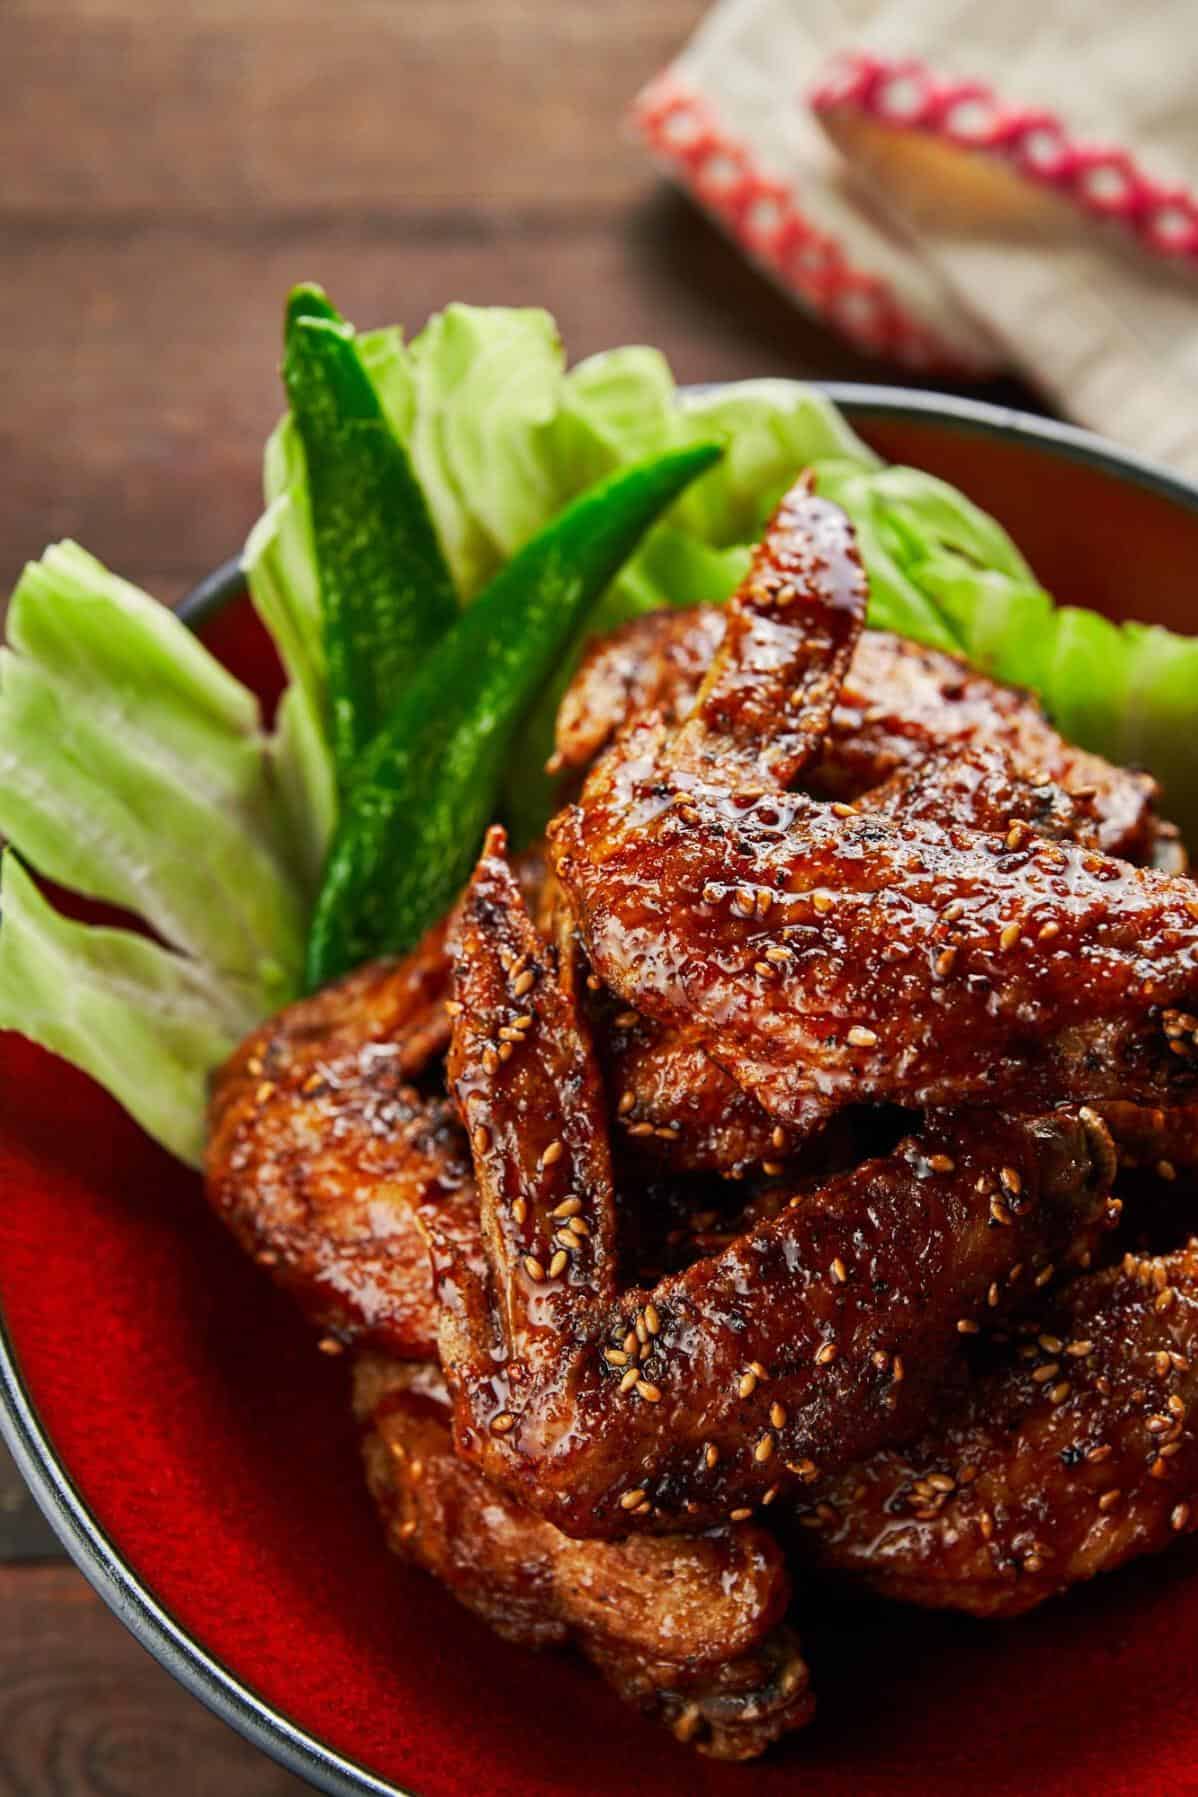  Dip, munch, and repeat! These tebasaki wings are perfect for some finger-licking goodness.